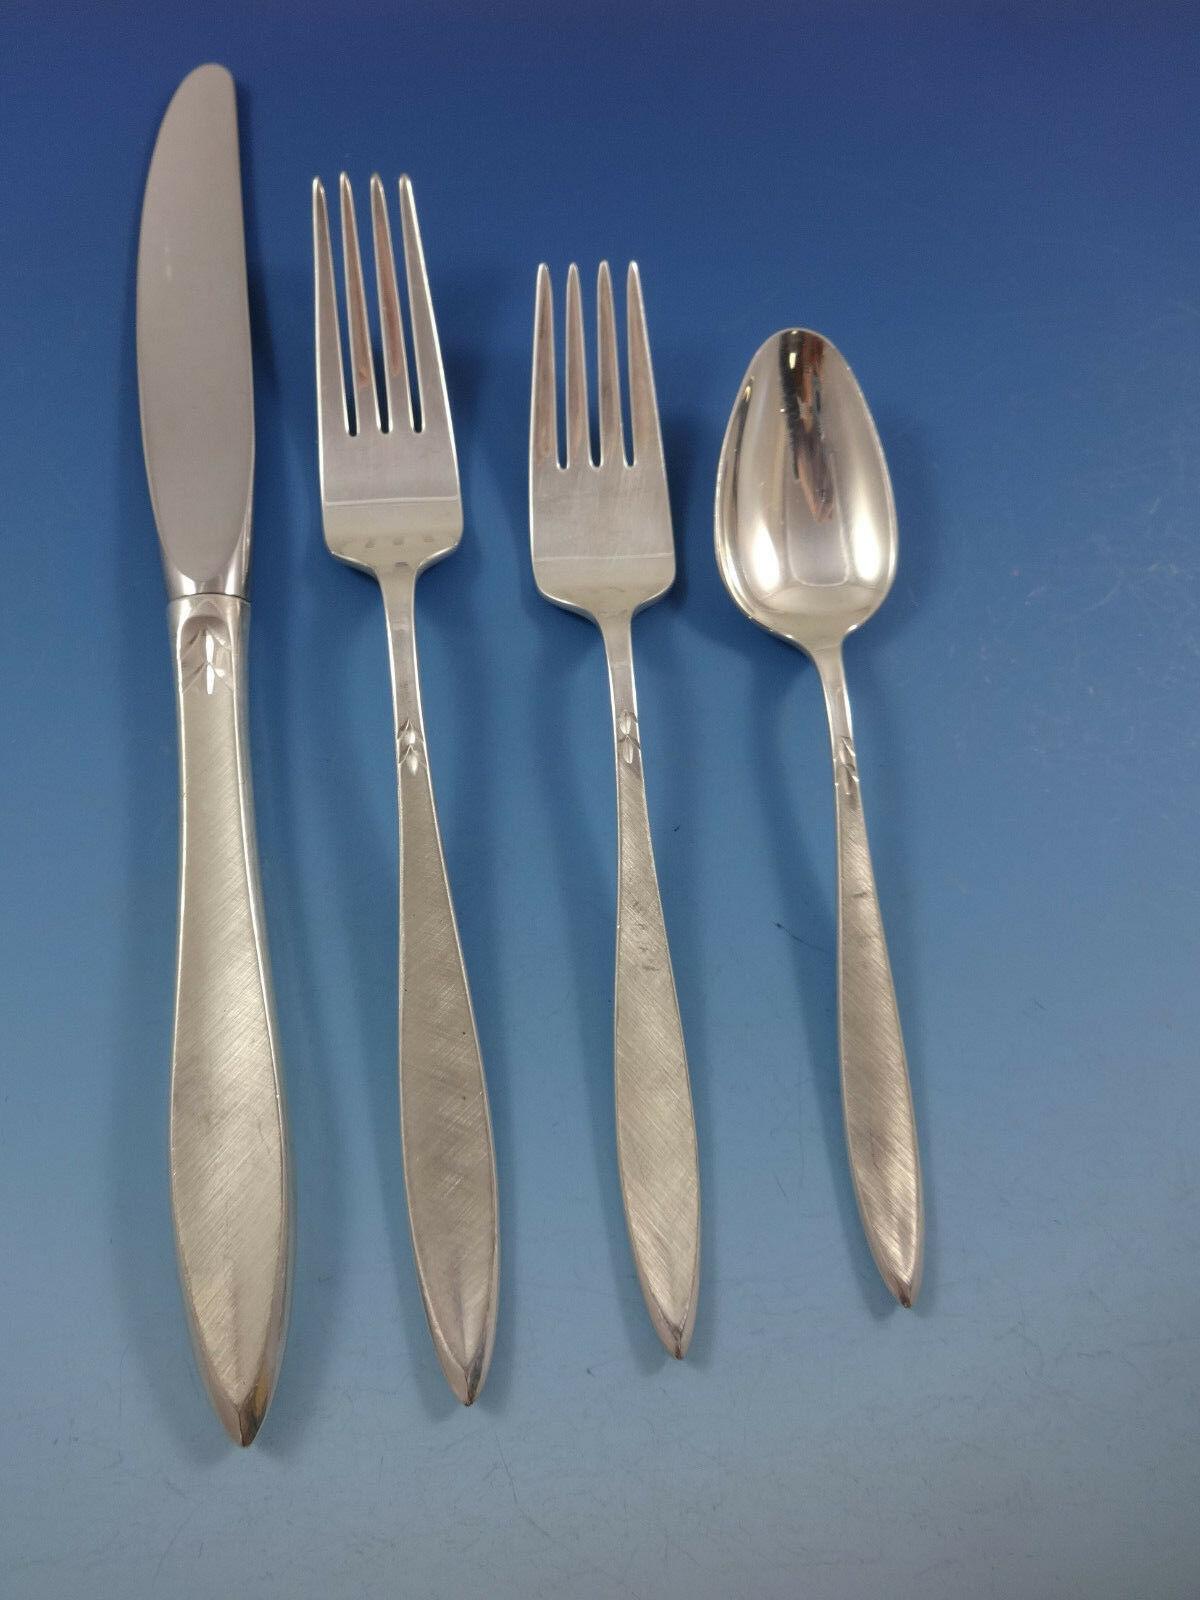 Gossamer by Gorham Sterling Silver Flatware Service for 8 Set 44 Pieces Modern In Excellent Condition For Sale In Big Bend, WI